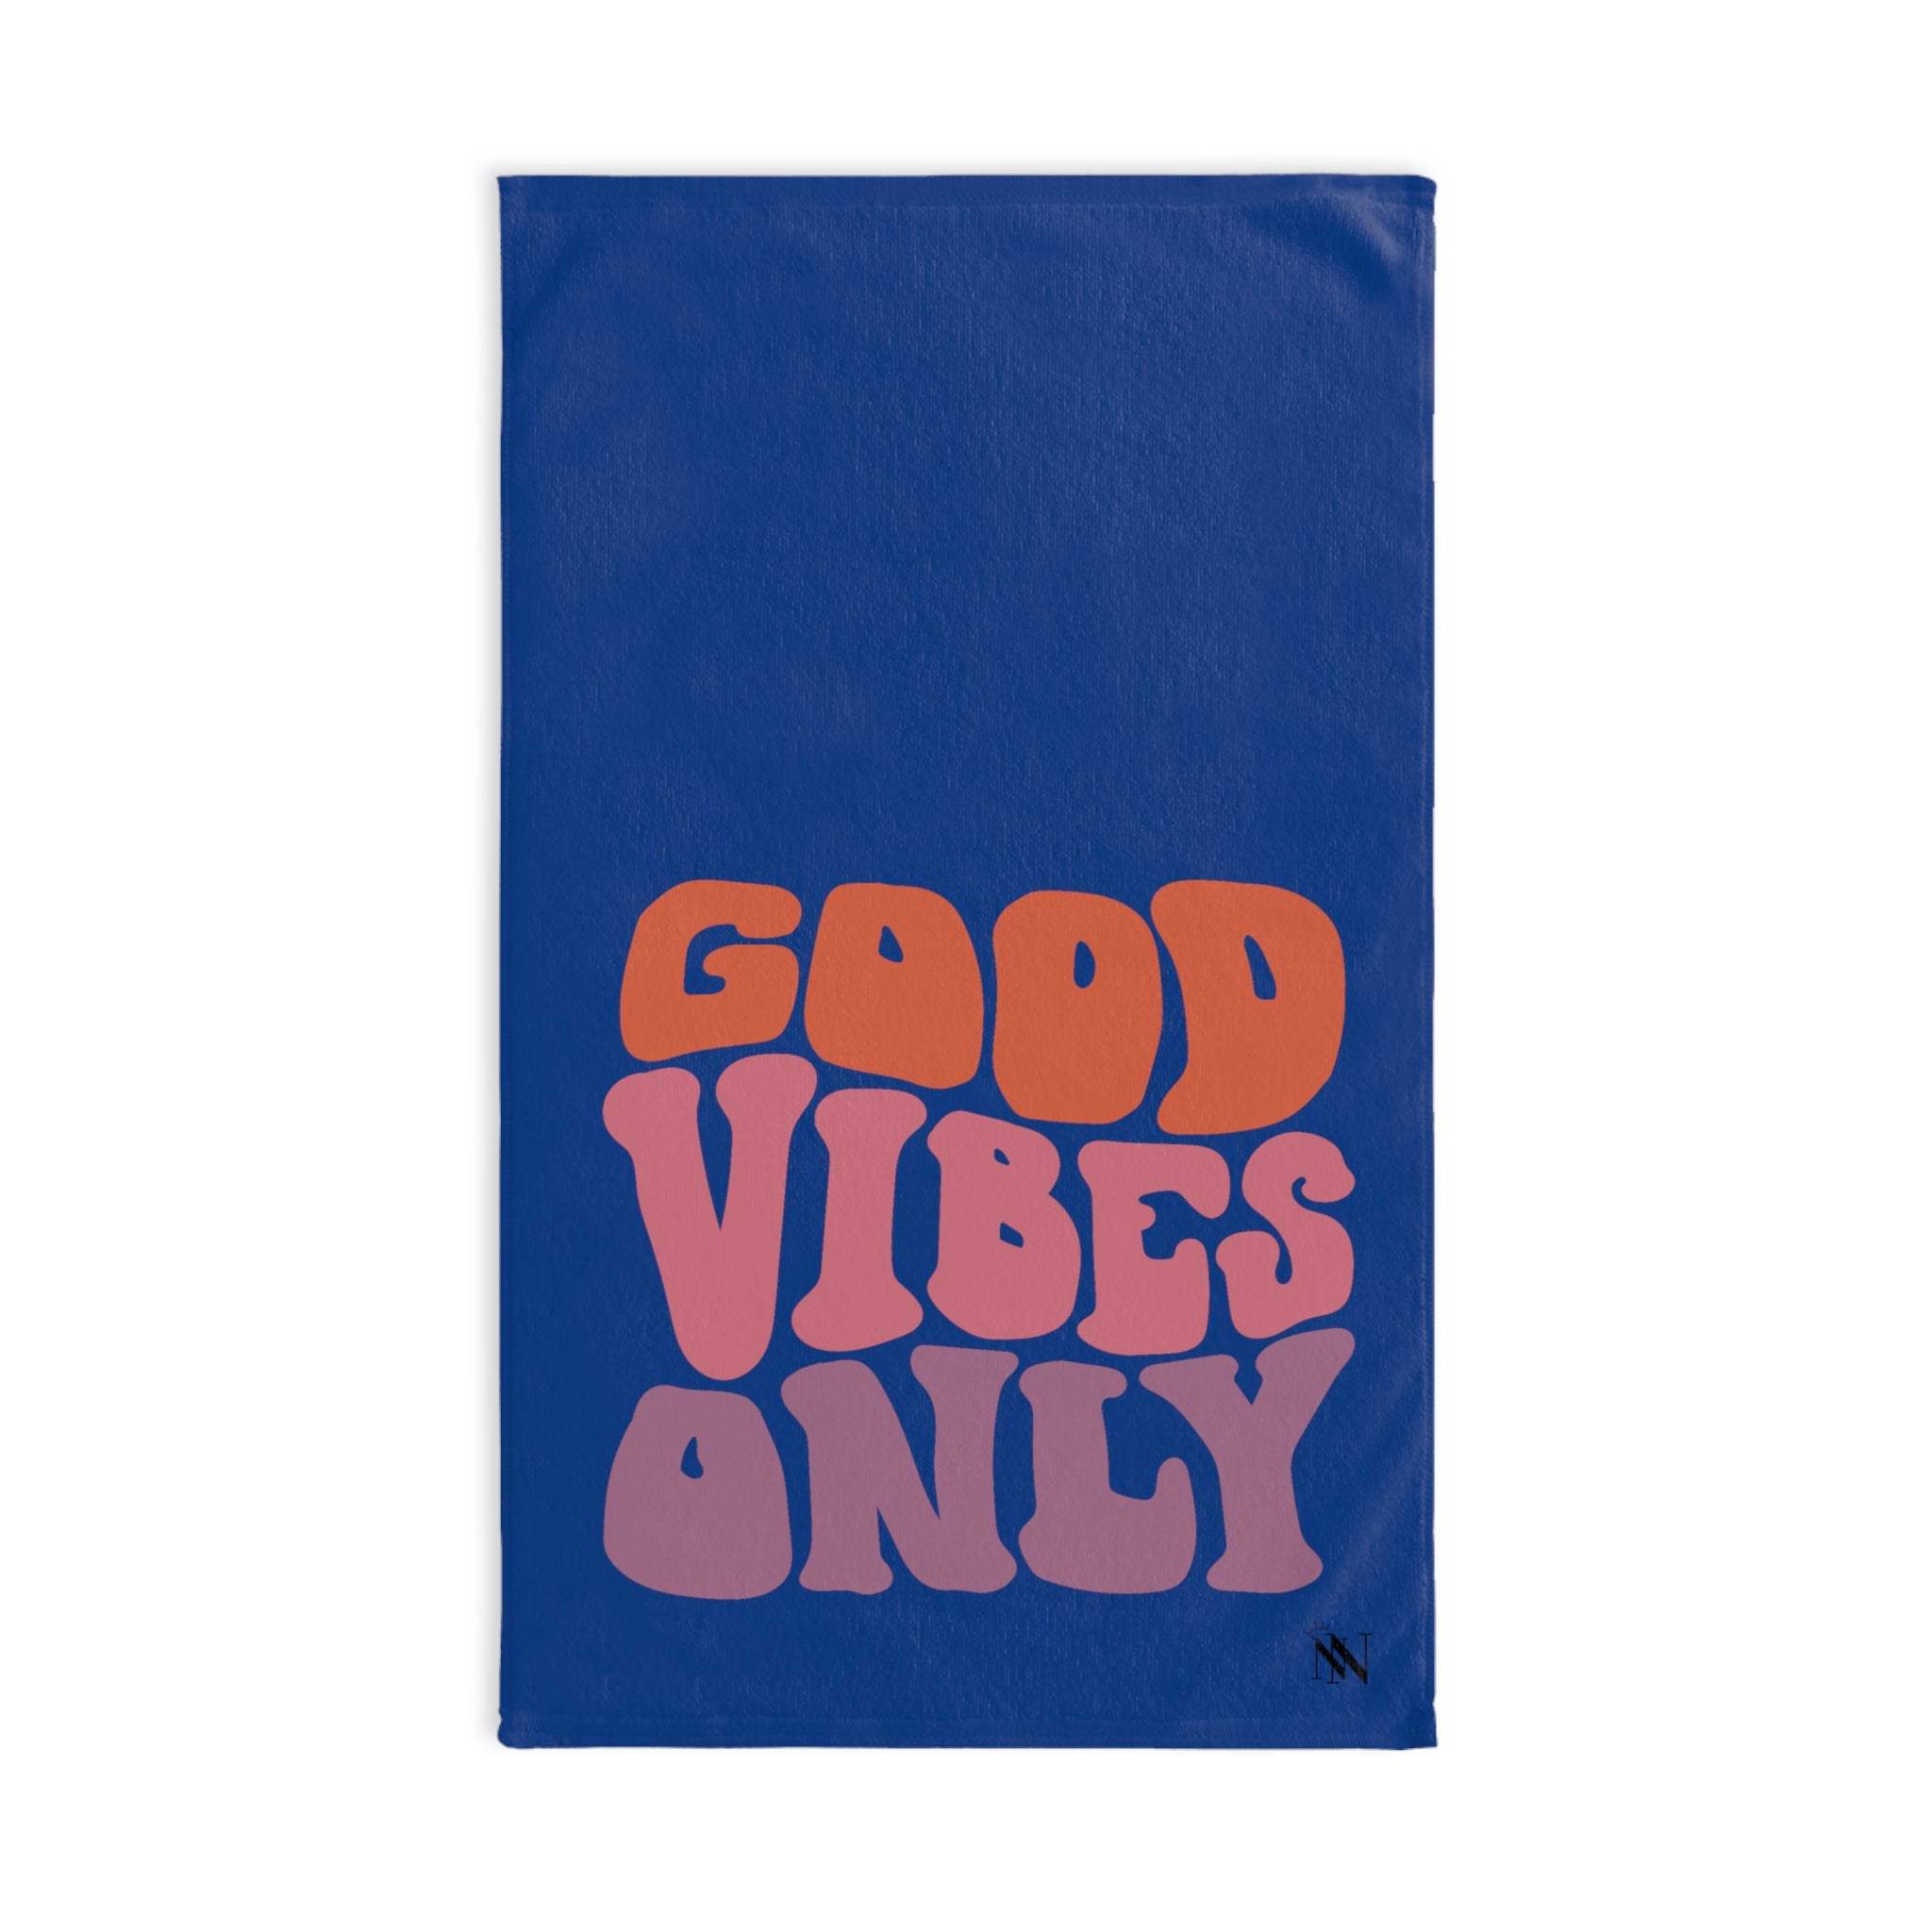 Only Vibes Good Blue | Gifts for Boyfriend, Funny Towel Romantic Gift for Wedding Couple Fiance First Year Anniversary Valentines, Party Gag Gifts, Joke Humor Cloth for Husband Men BF NECTAR NAPKINS